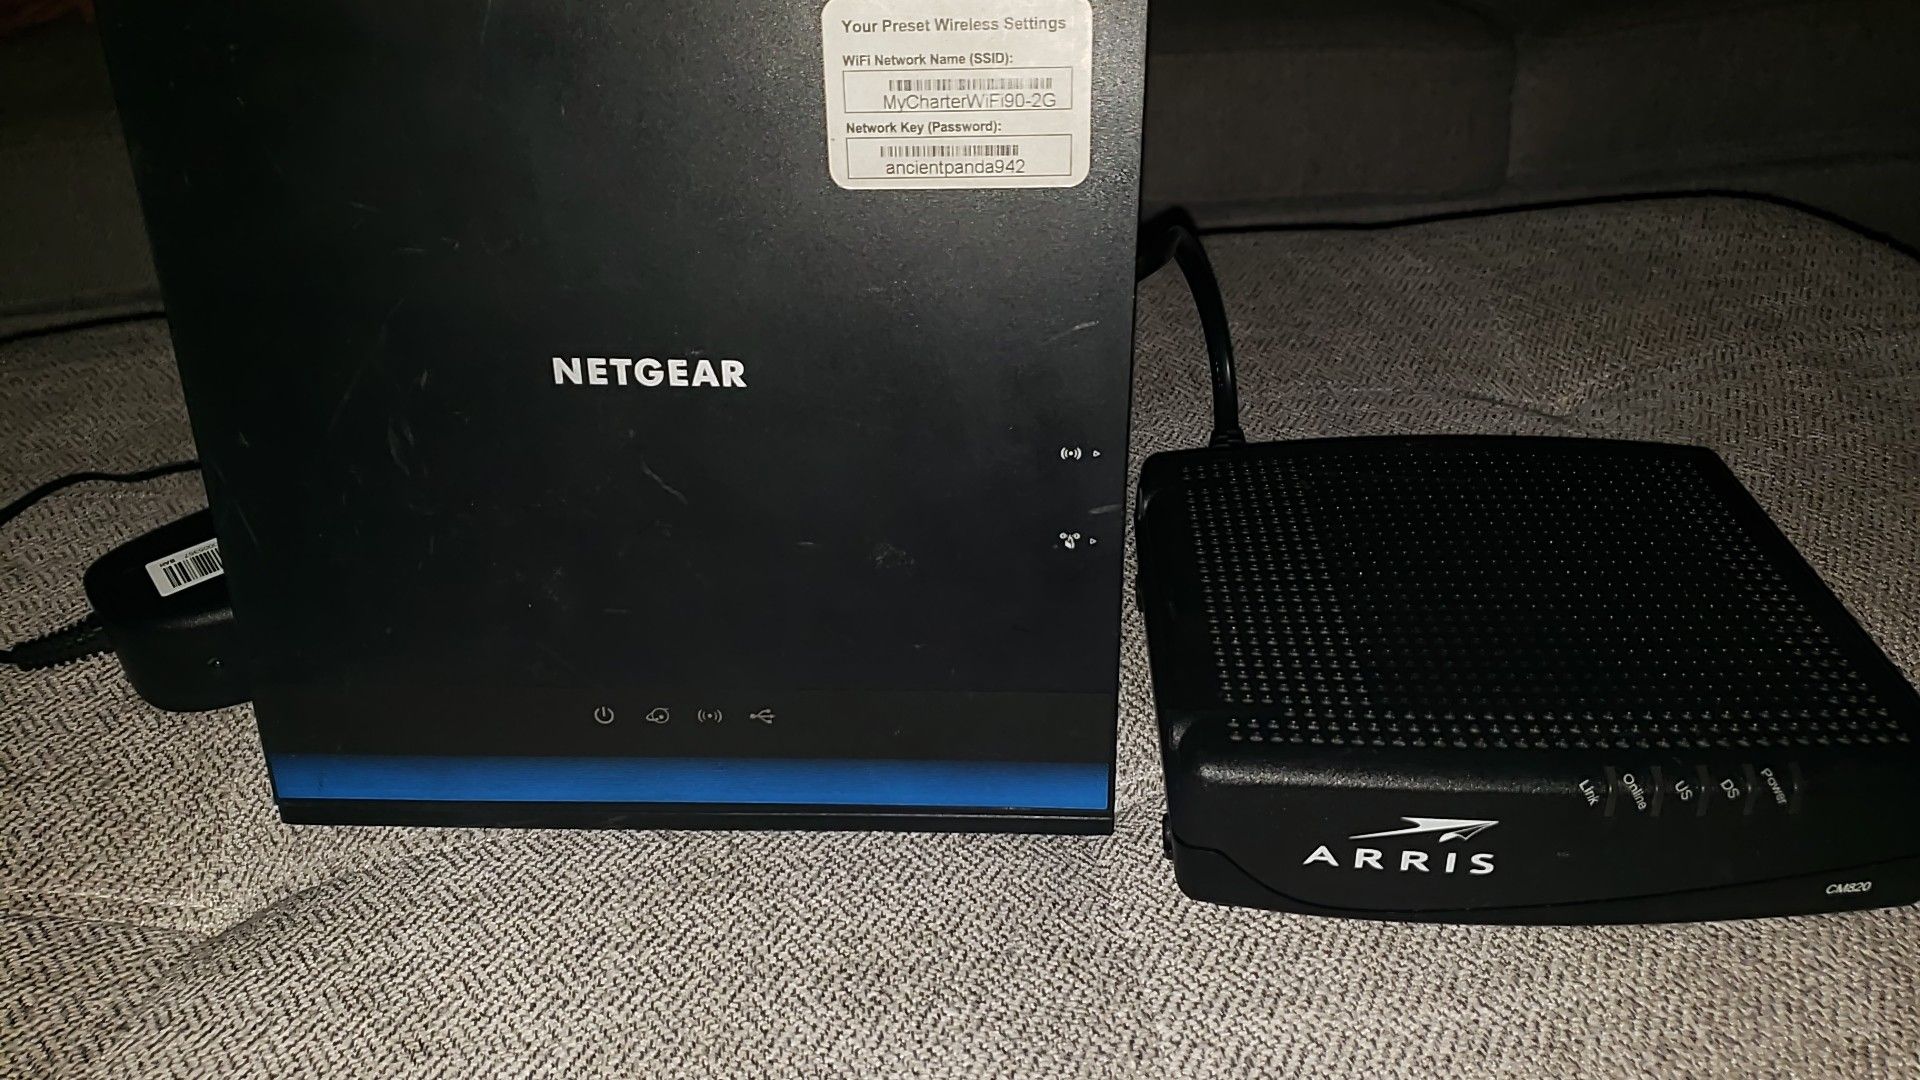 Netgear and Arris router and modem